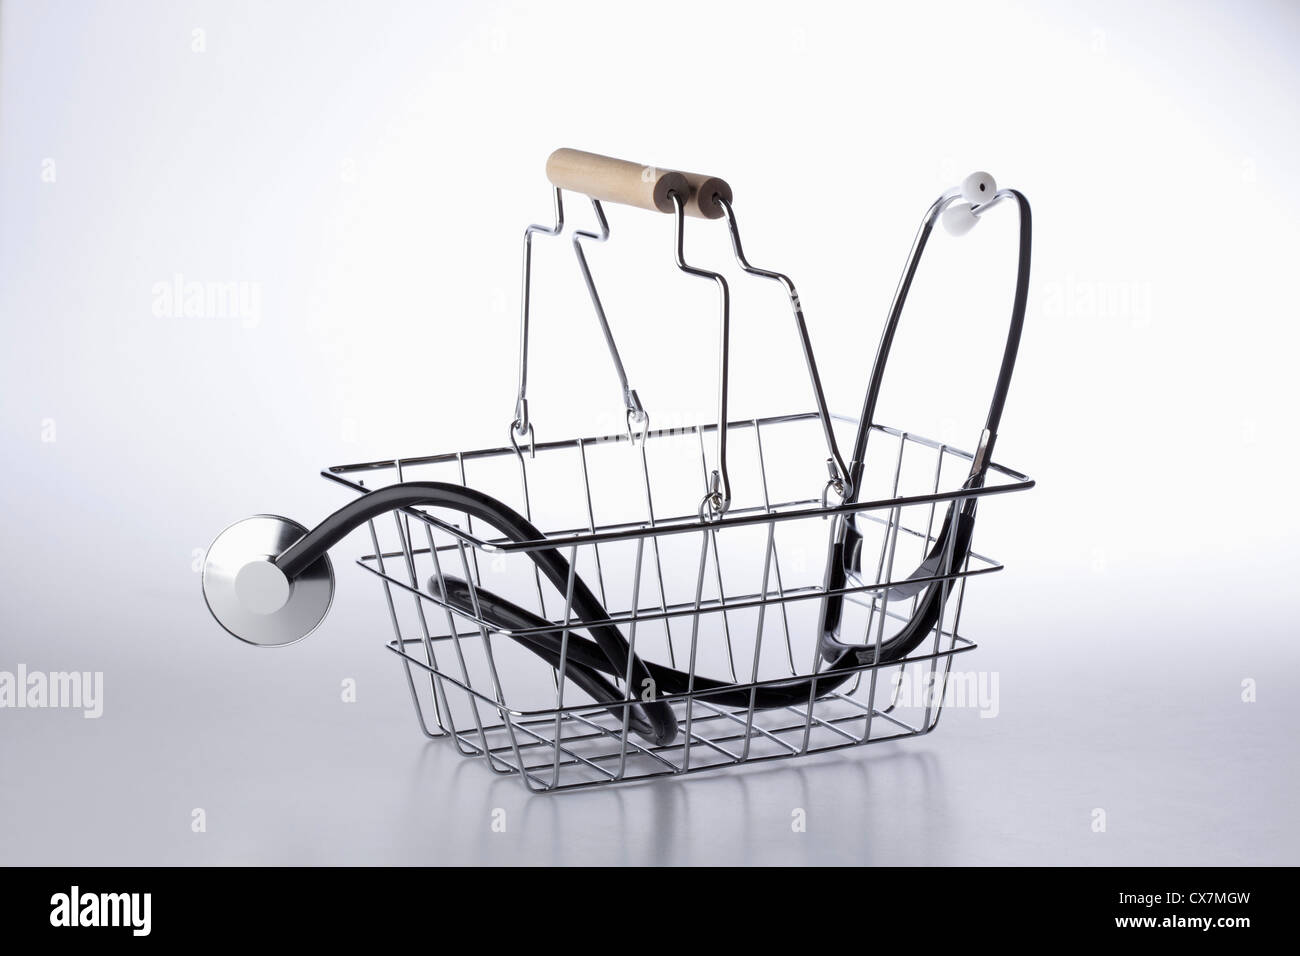 A shopping basket with a stethoscope in it Stock Photo